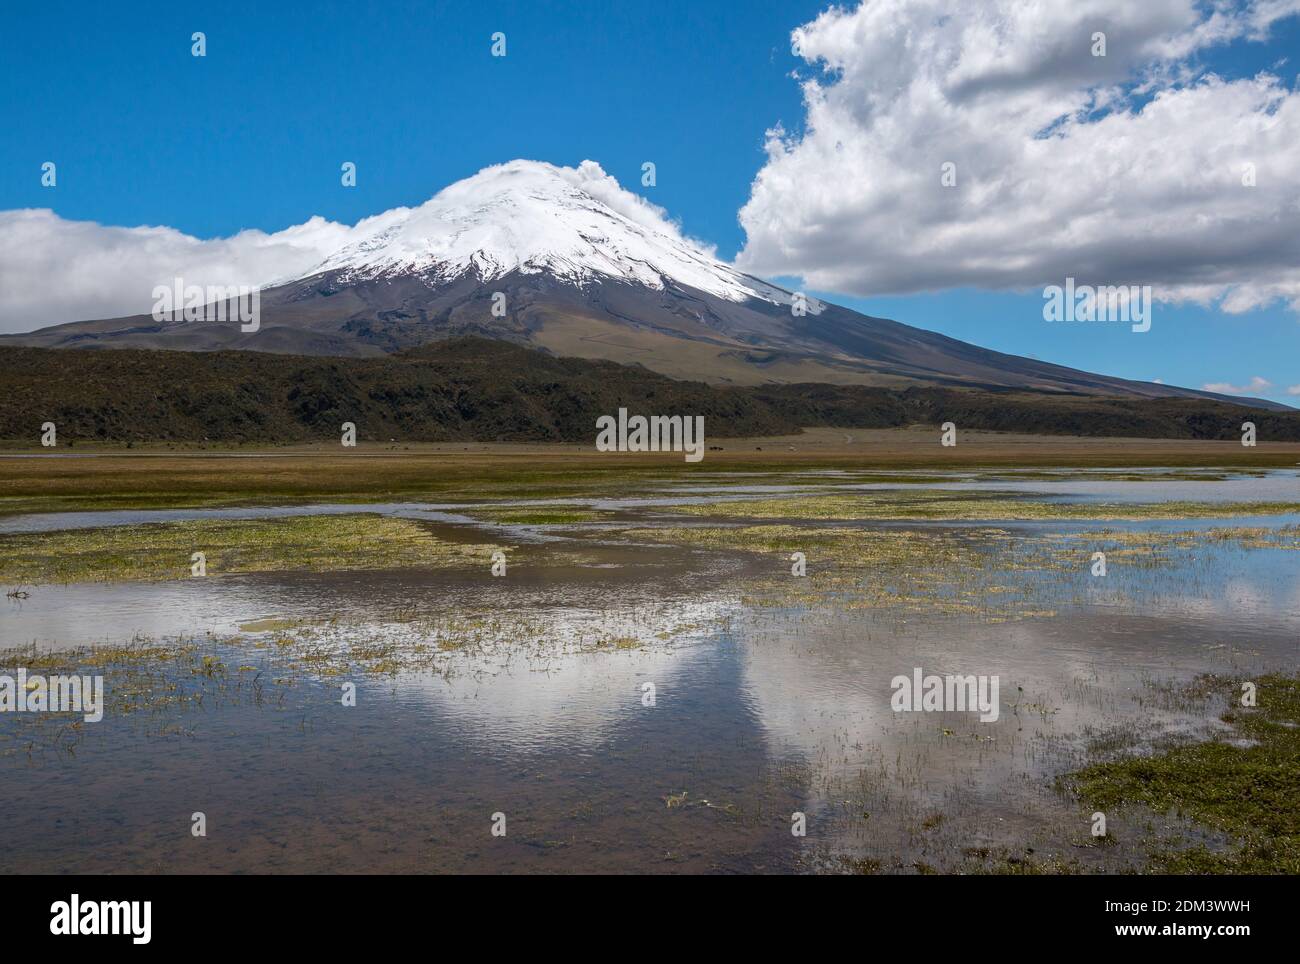 The snowcapped Cotopaxi Volcano reflected in a lake  (Laguna Limpiopungo). Cotopaxi National Park in the Ecuadorian Andes. Stock Photo